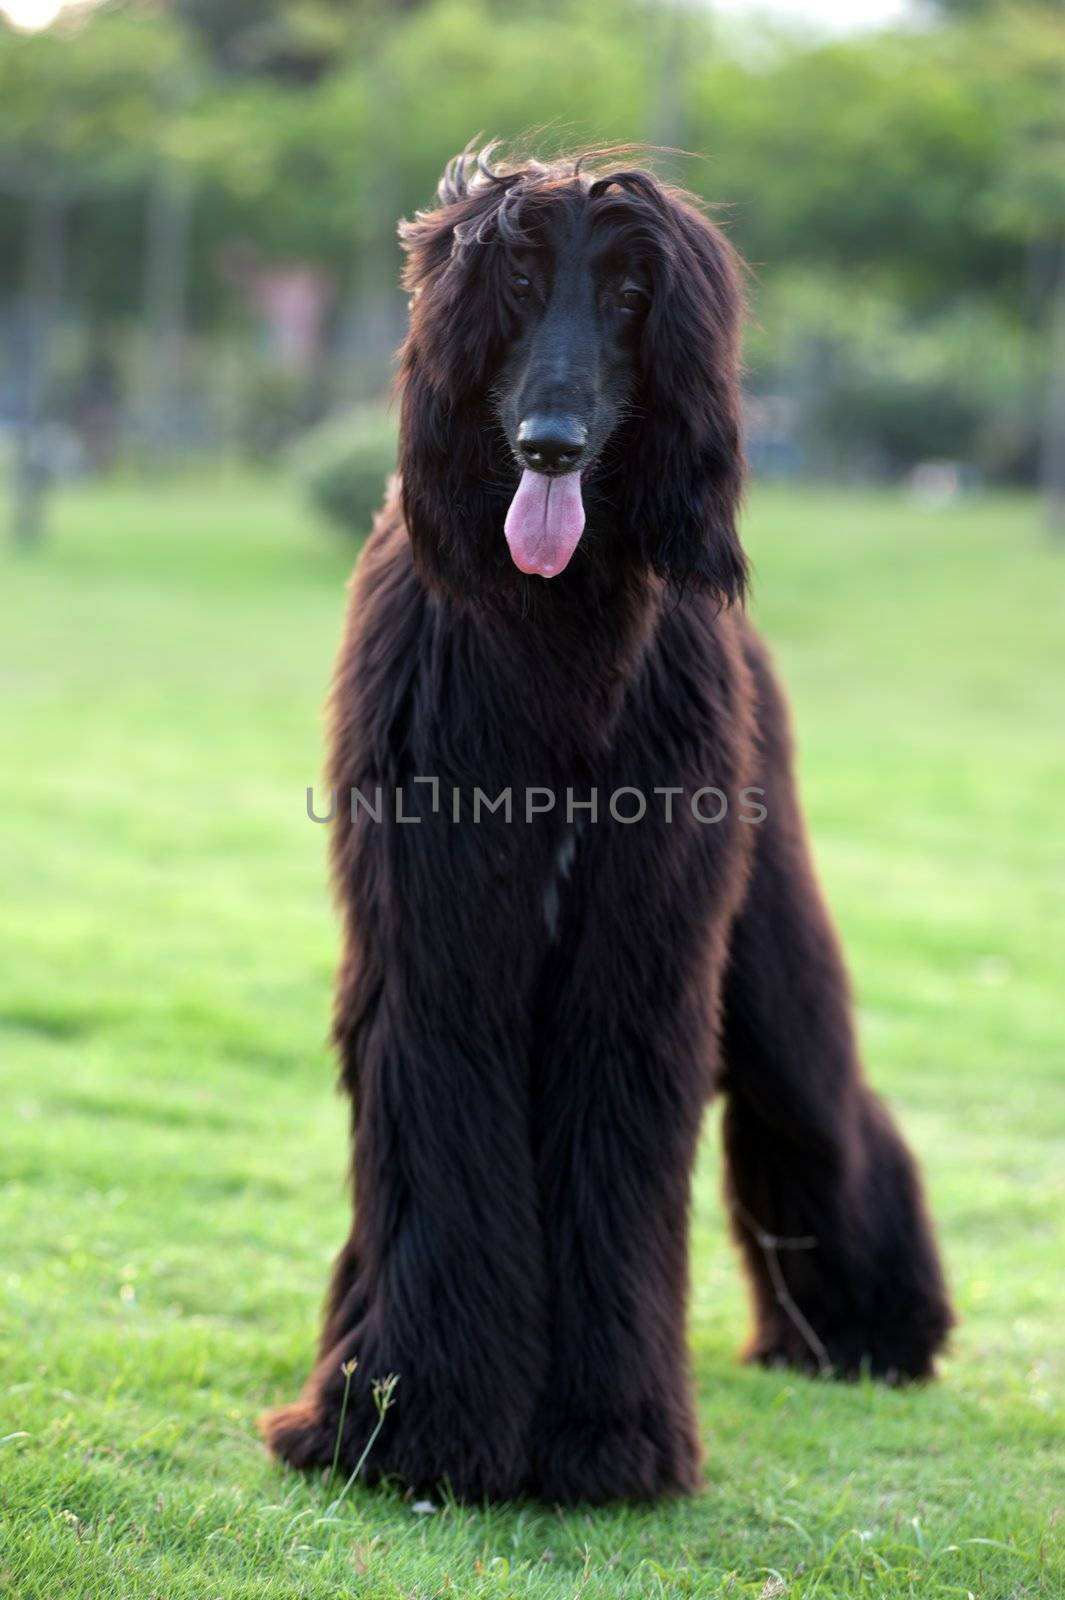 Black afghan hound dog standing on the lawn